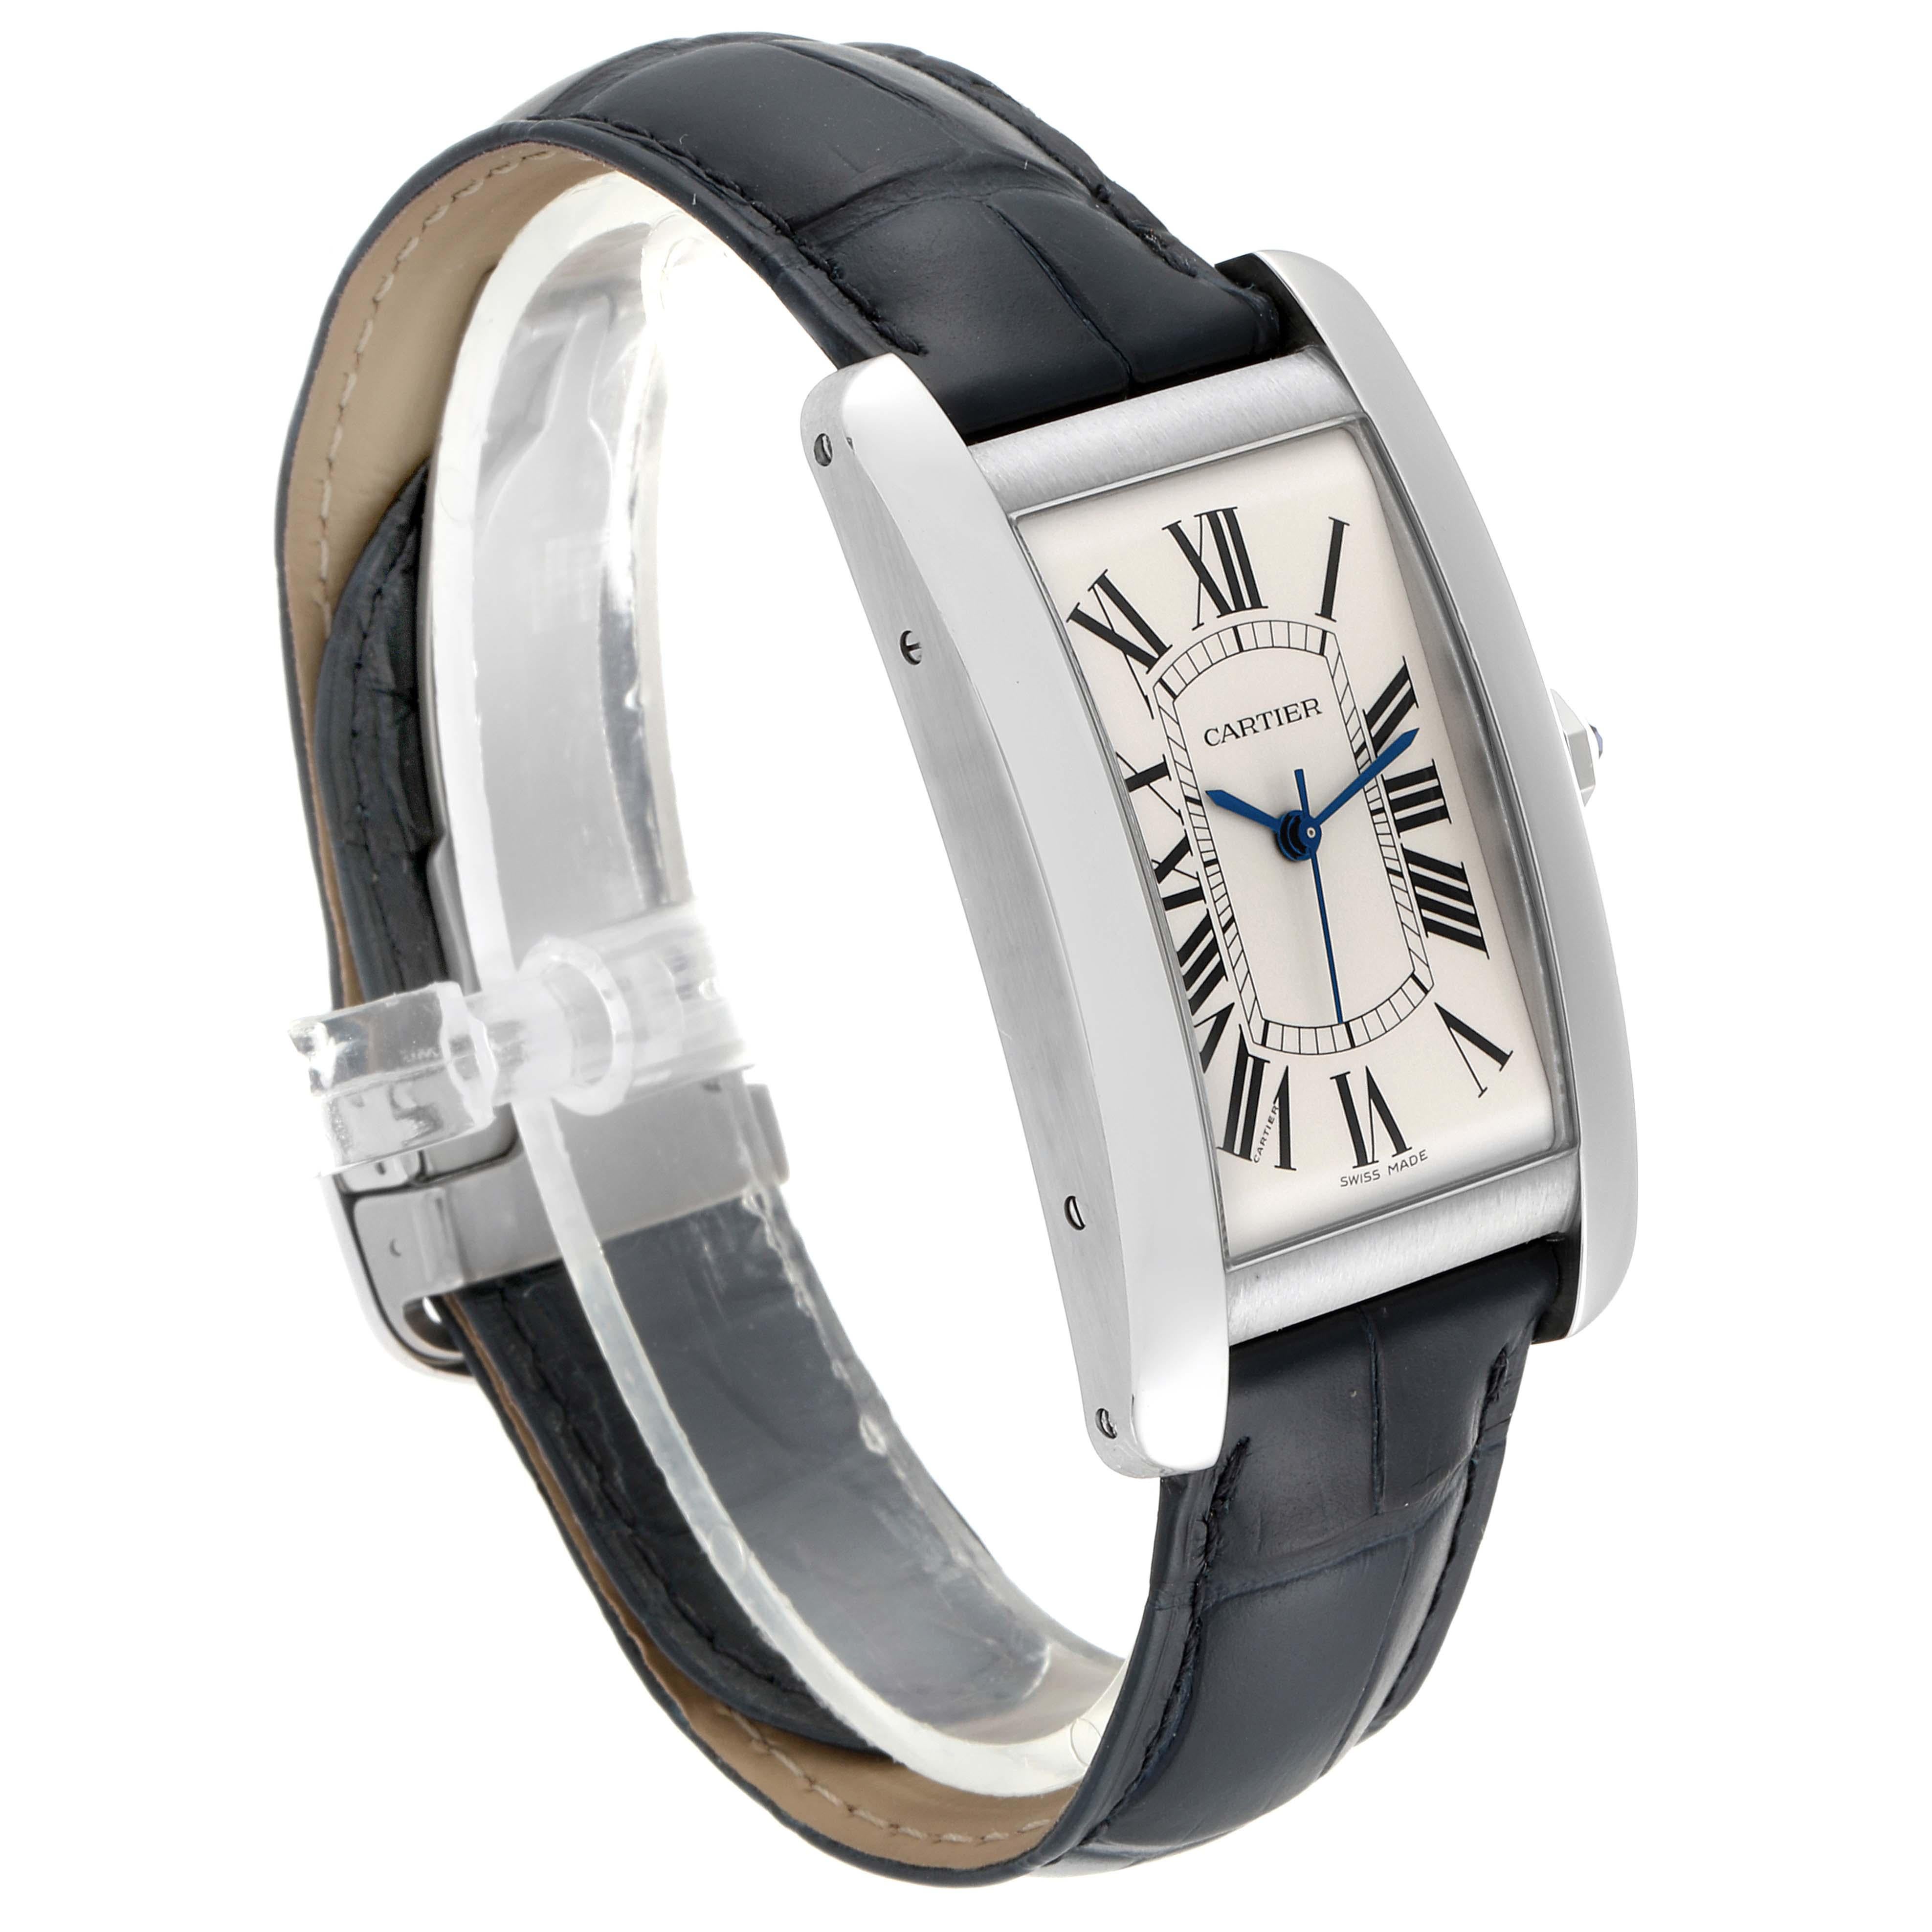 Cartier Tank Americaine Stainless Steel Large Men’s Watch WSTA0018 Box Papers In Excellent Condition For Sale In Atlanta, GA